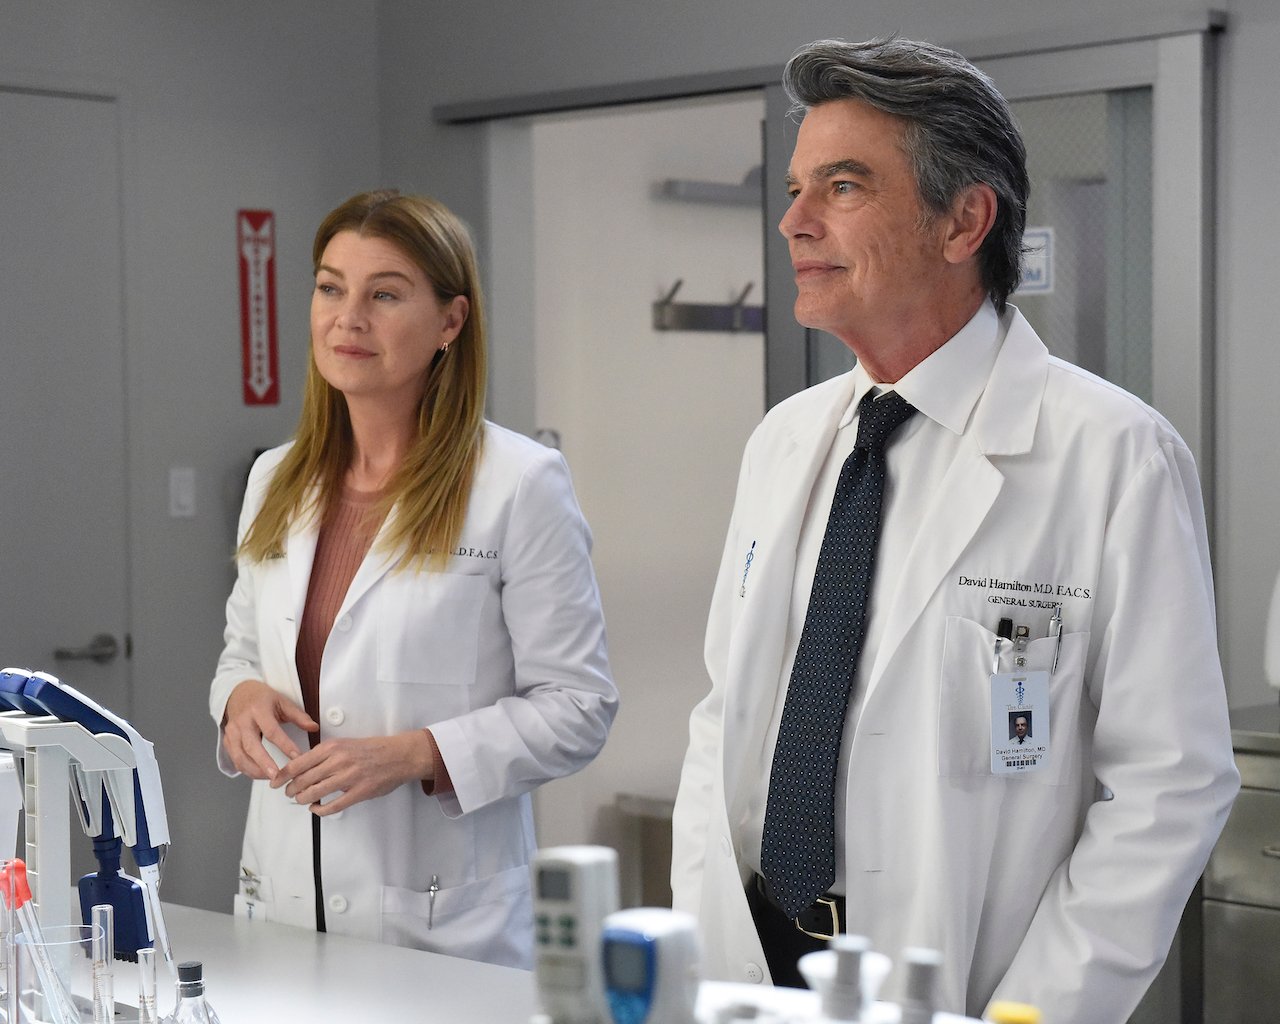 Ellen Pompeo as Meredith Grey and Peter Gallagher as David Hamilton wear lab coats in a lab on 'Grey's Anatomy'.